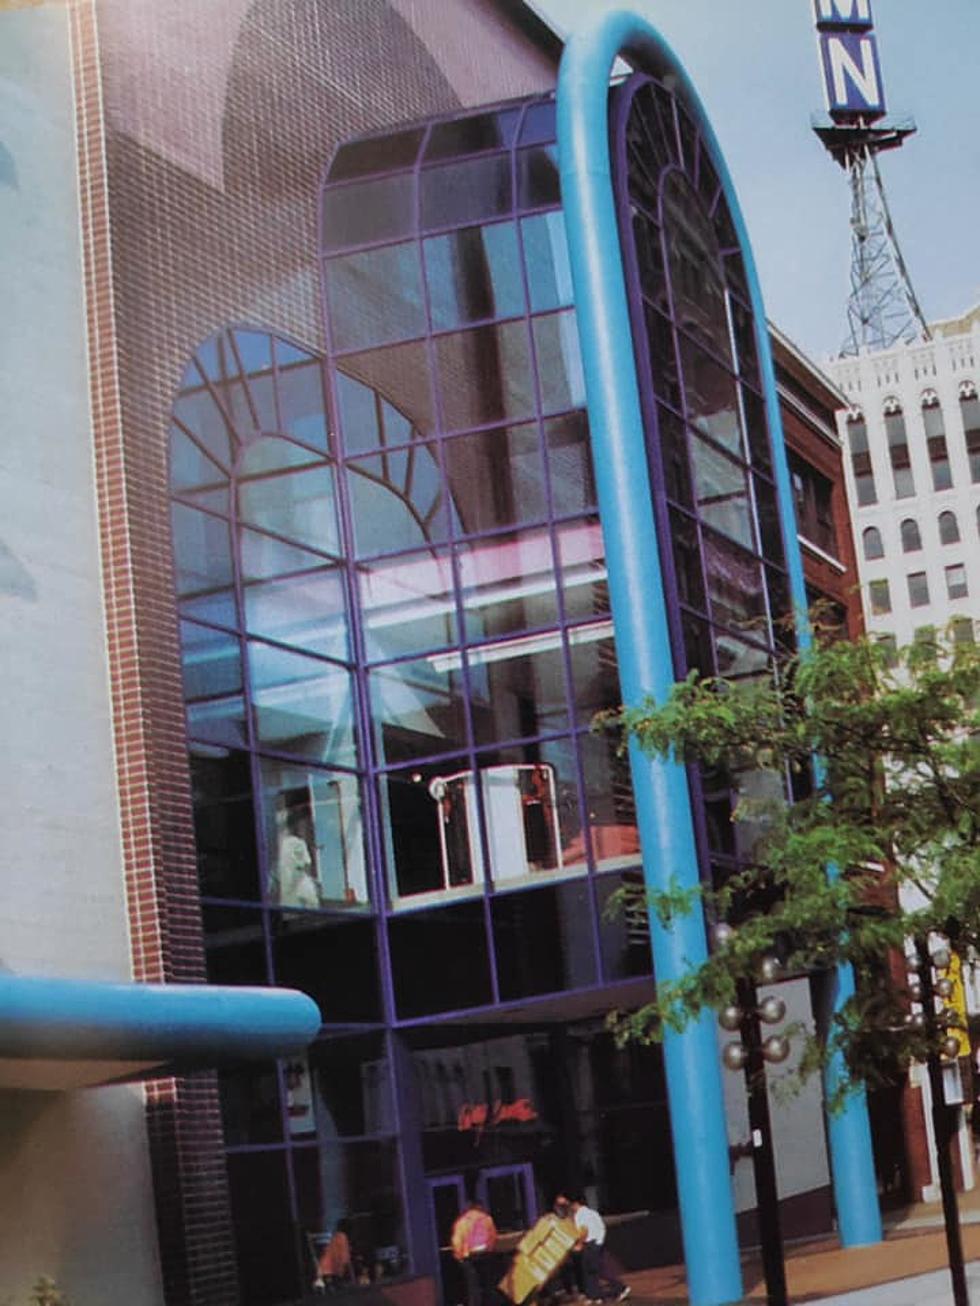 Do You Remember the Downtown Grand Rapids City Centre?